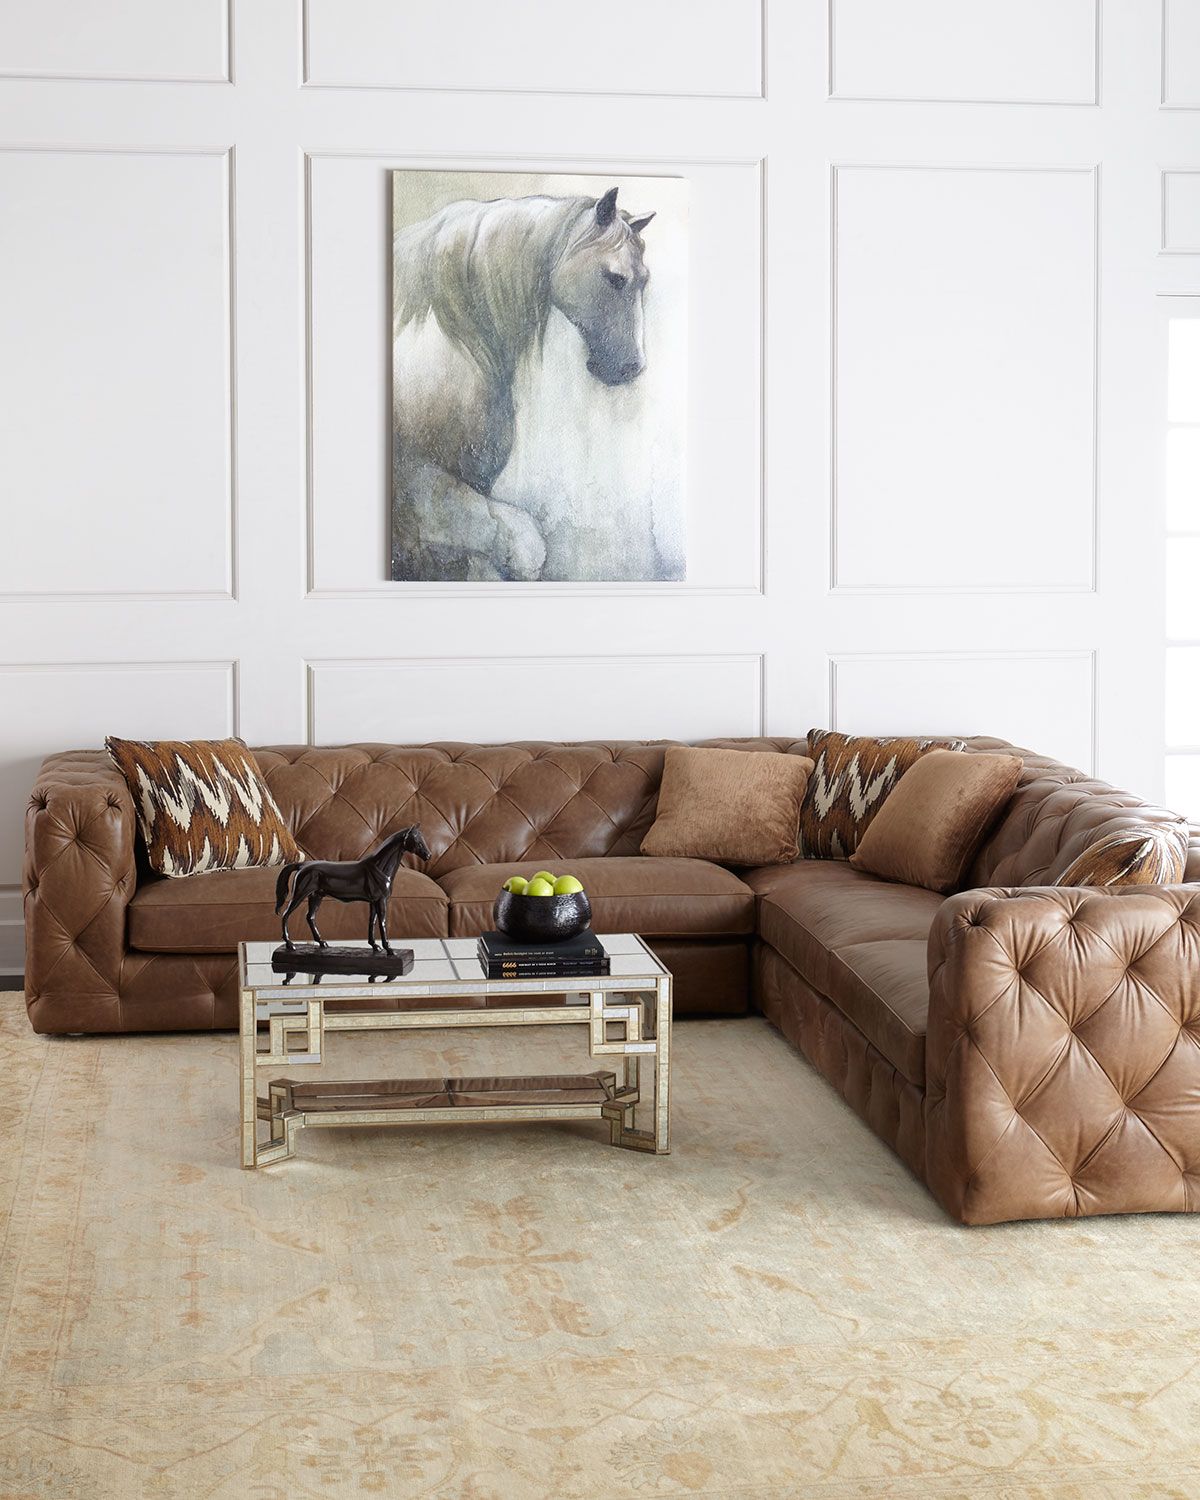 tufted leather sectional with square arms. traditional paneling in neutral  room.